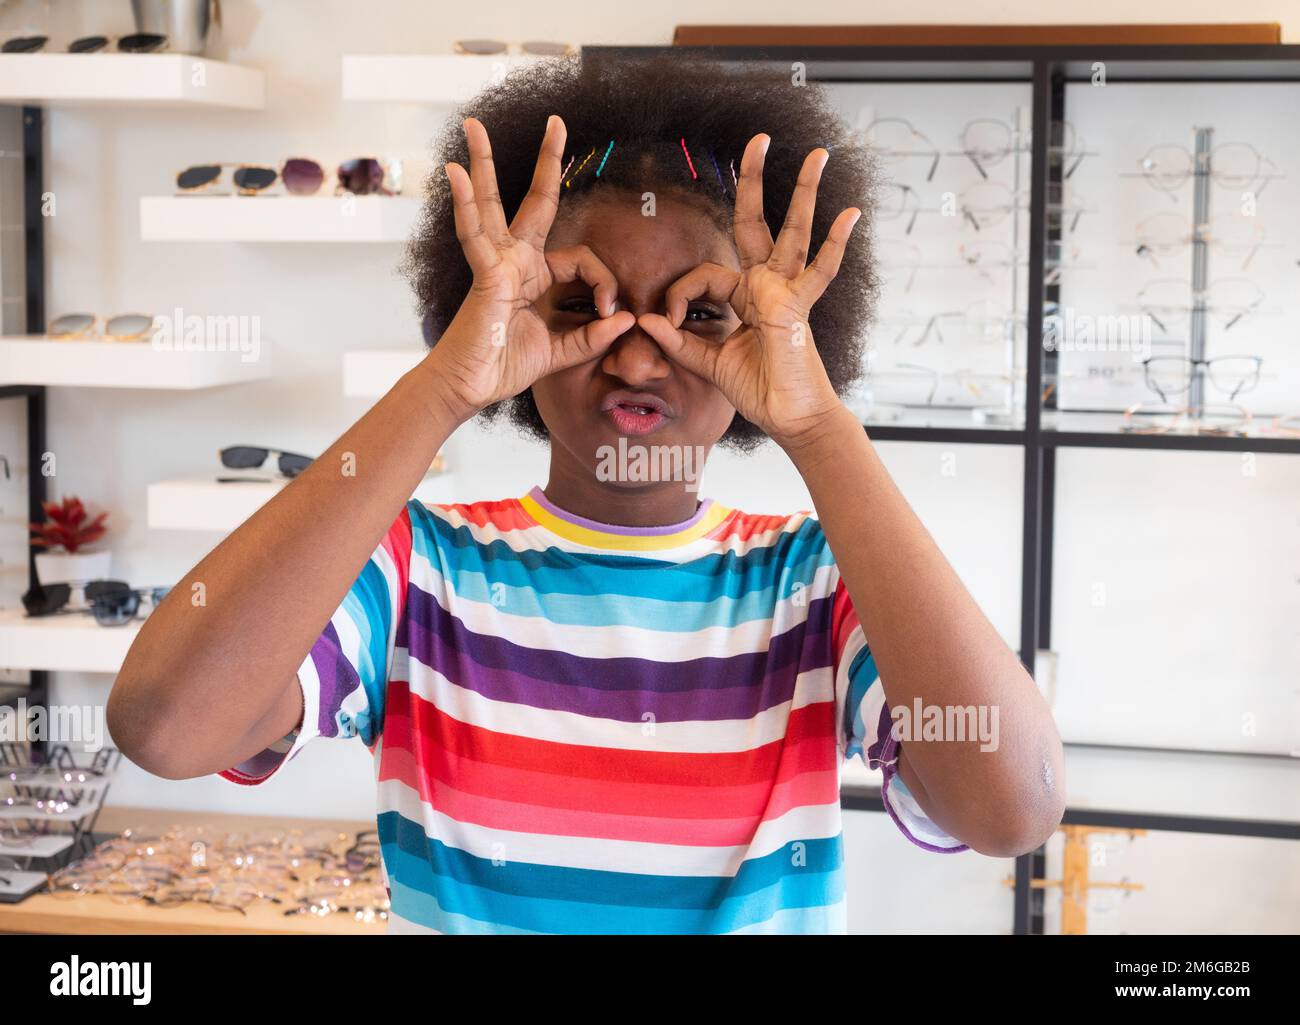 Portrait of a brightly smiling African girl puts her finger in a semicircle symbolizing eyeglasses as she selects a frame in an optical shop. Stock Photo